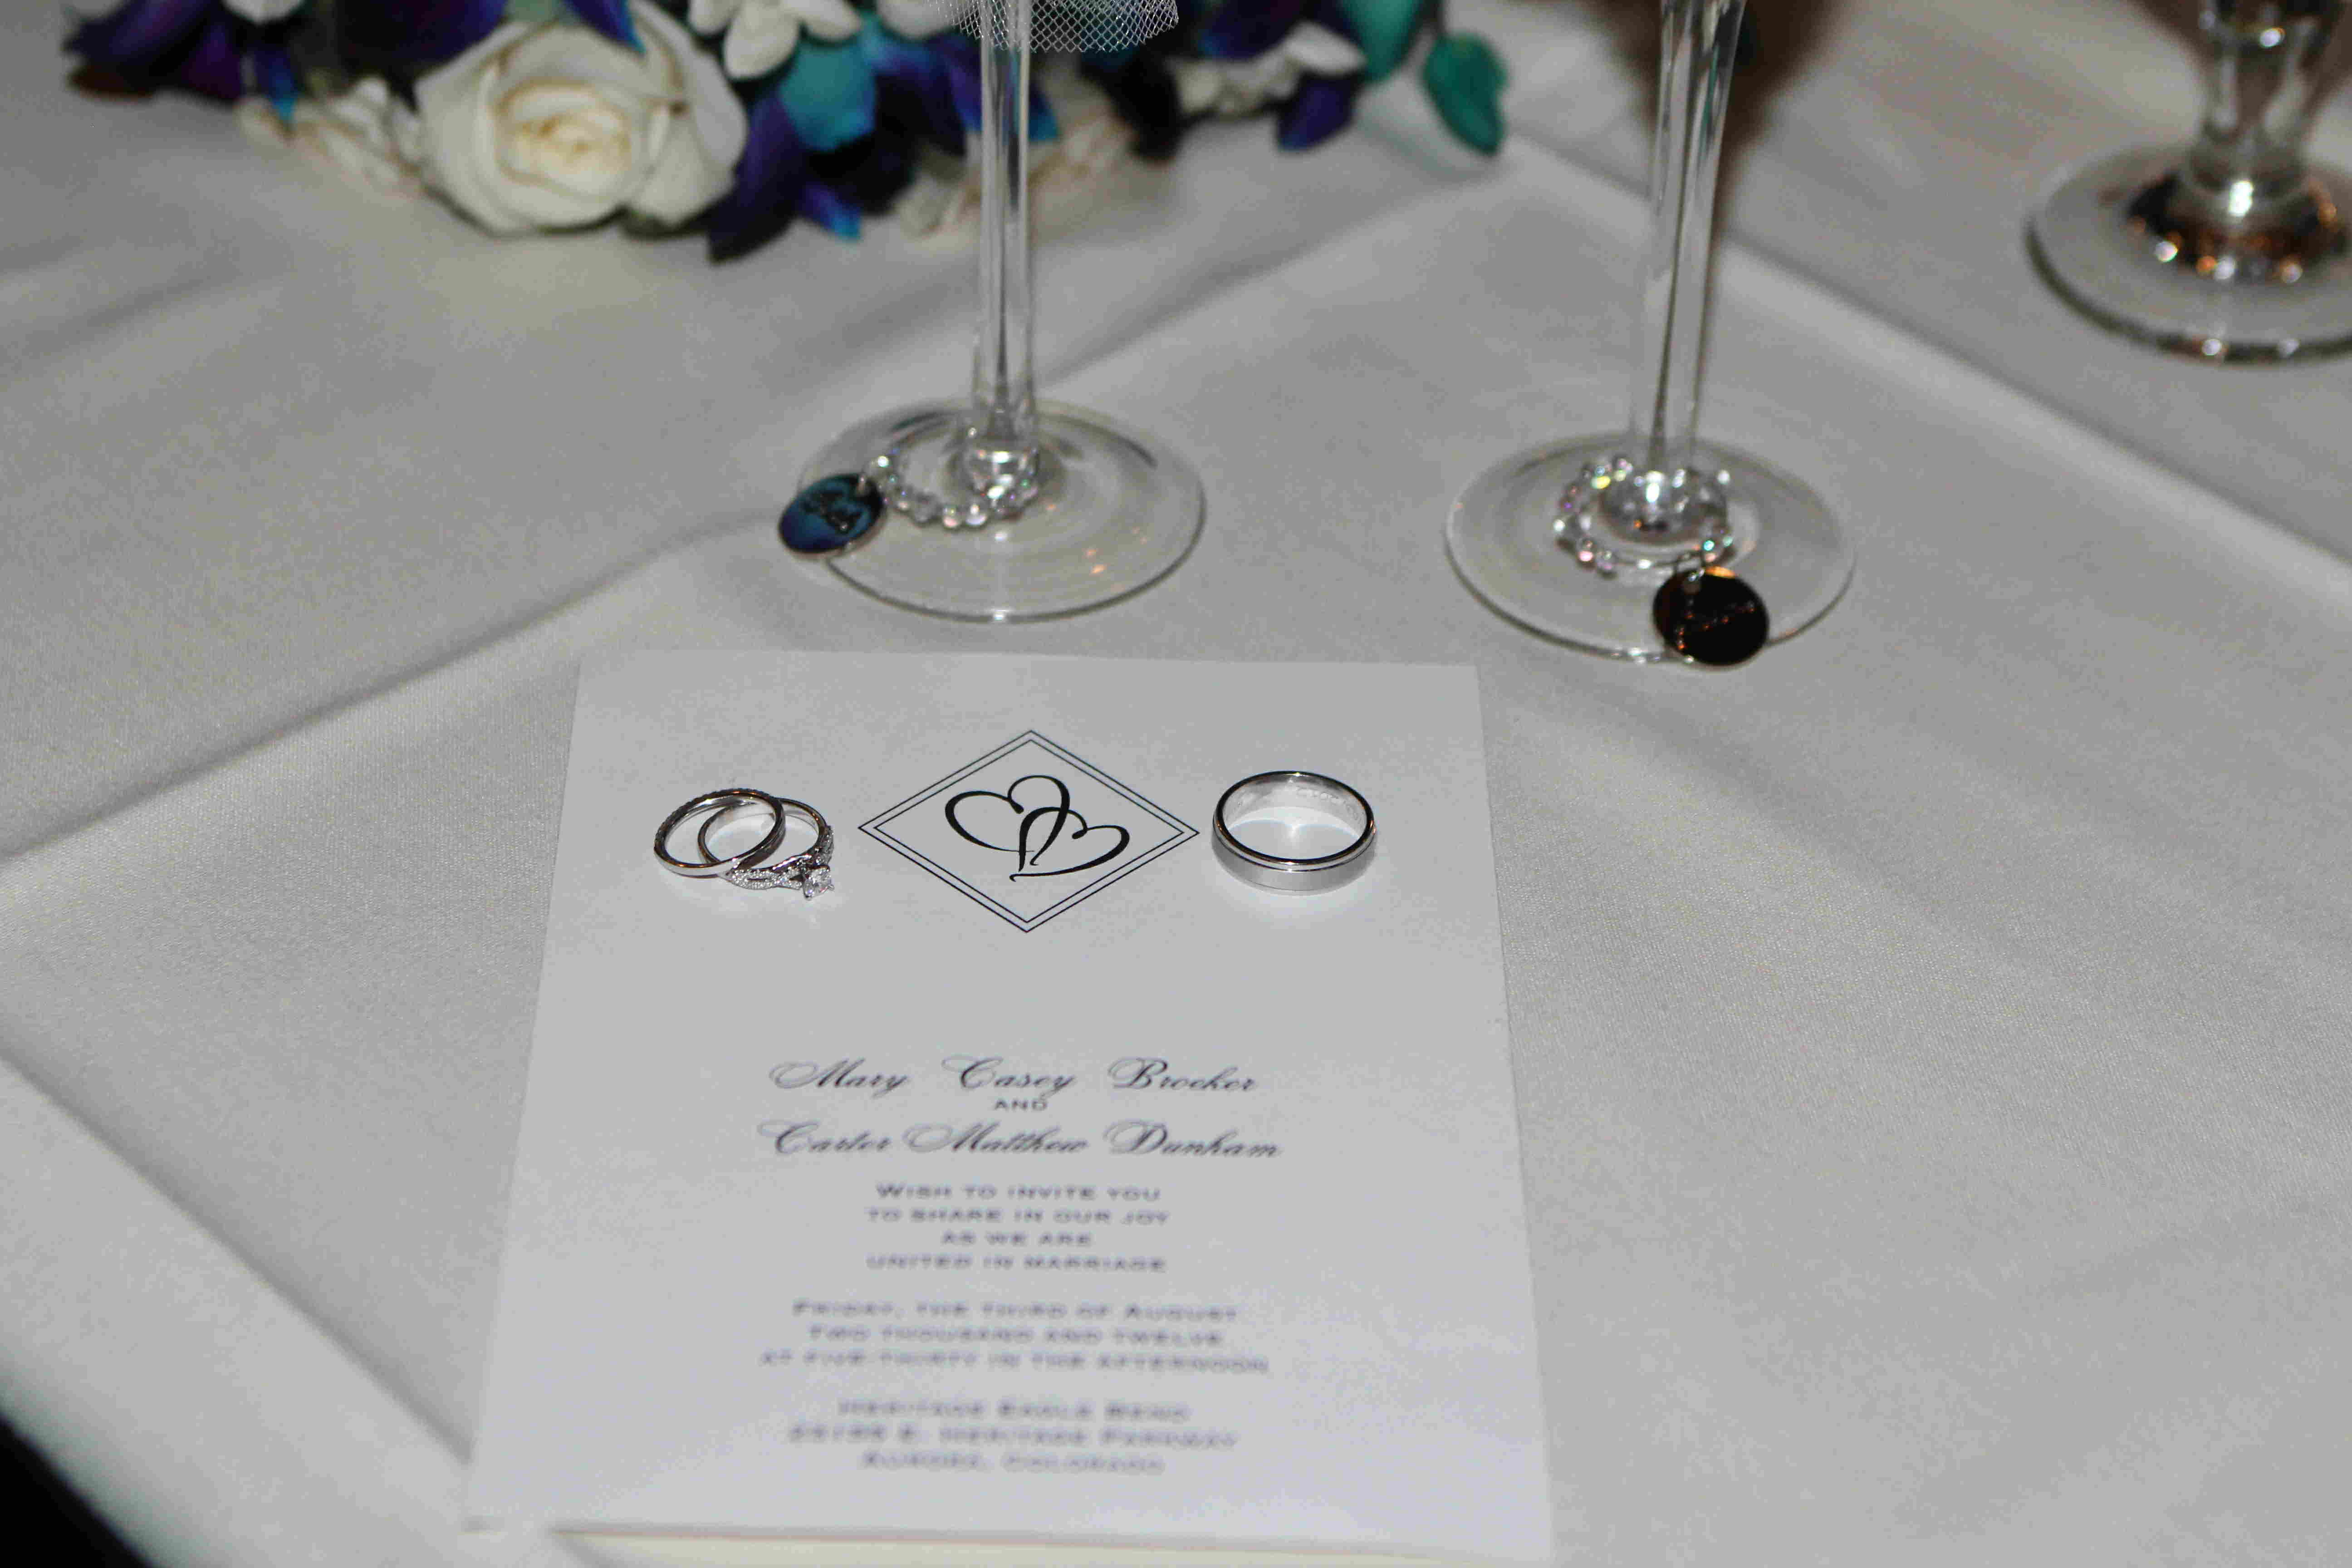 Invitation and rings - no detail missed